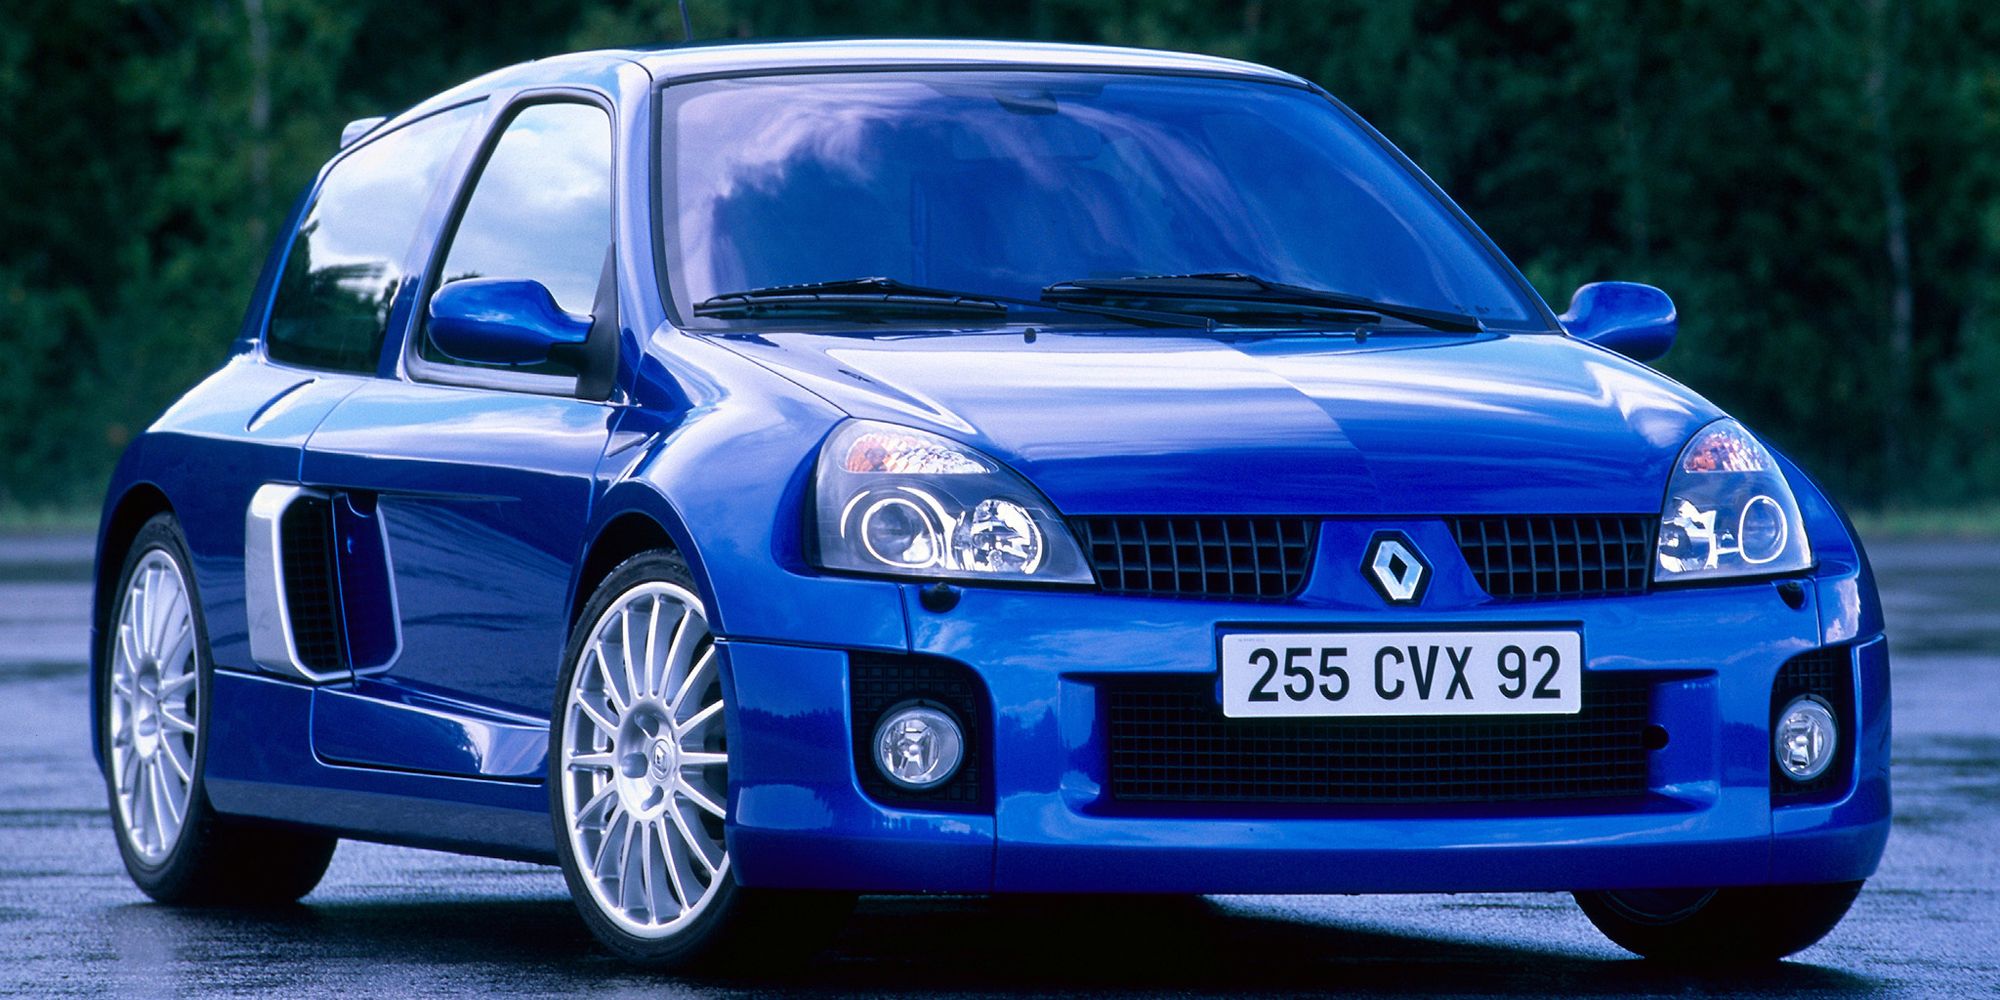 The front of the Clio V6 Phase II